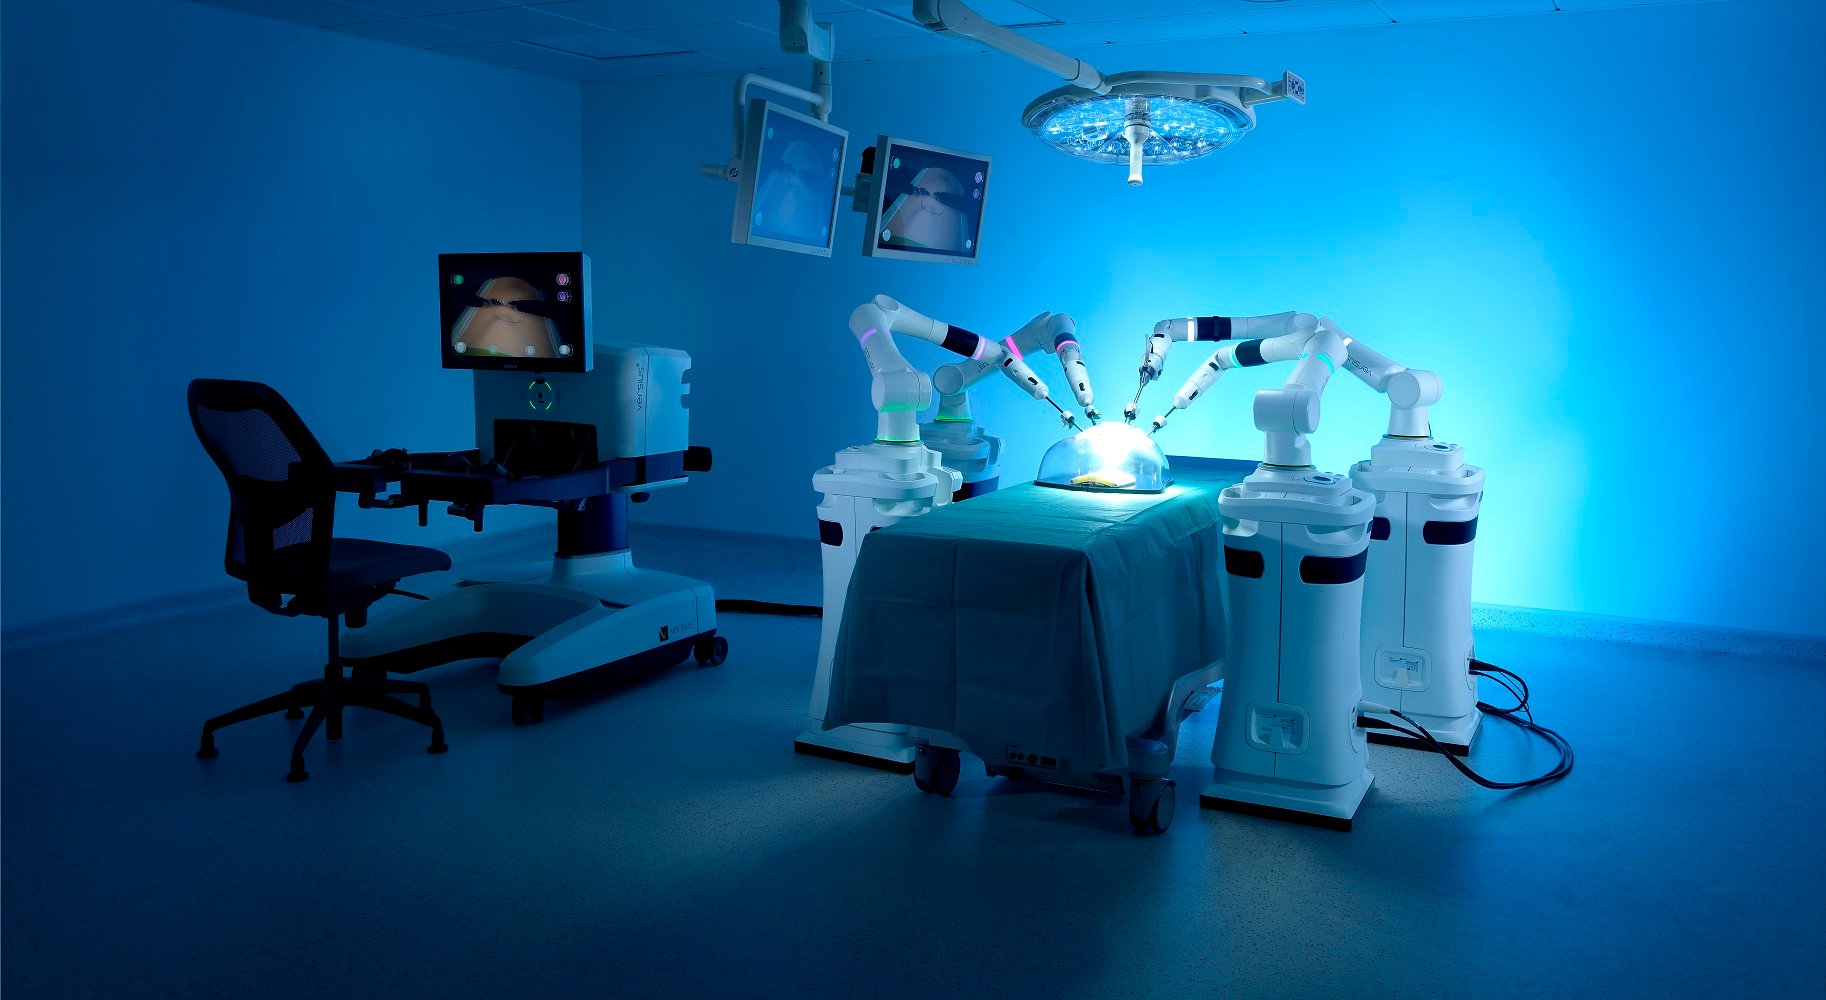 CMR Surgical sews up $165M in funding as it continues its global robot rollout